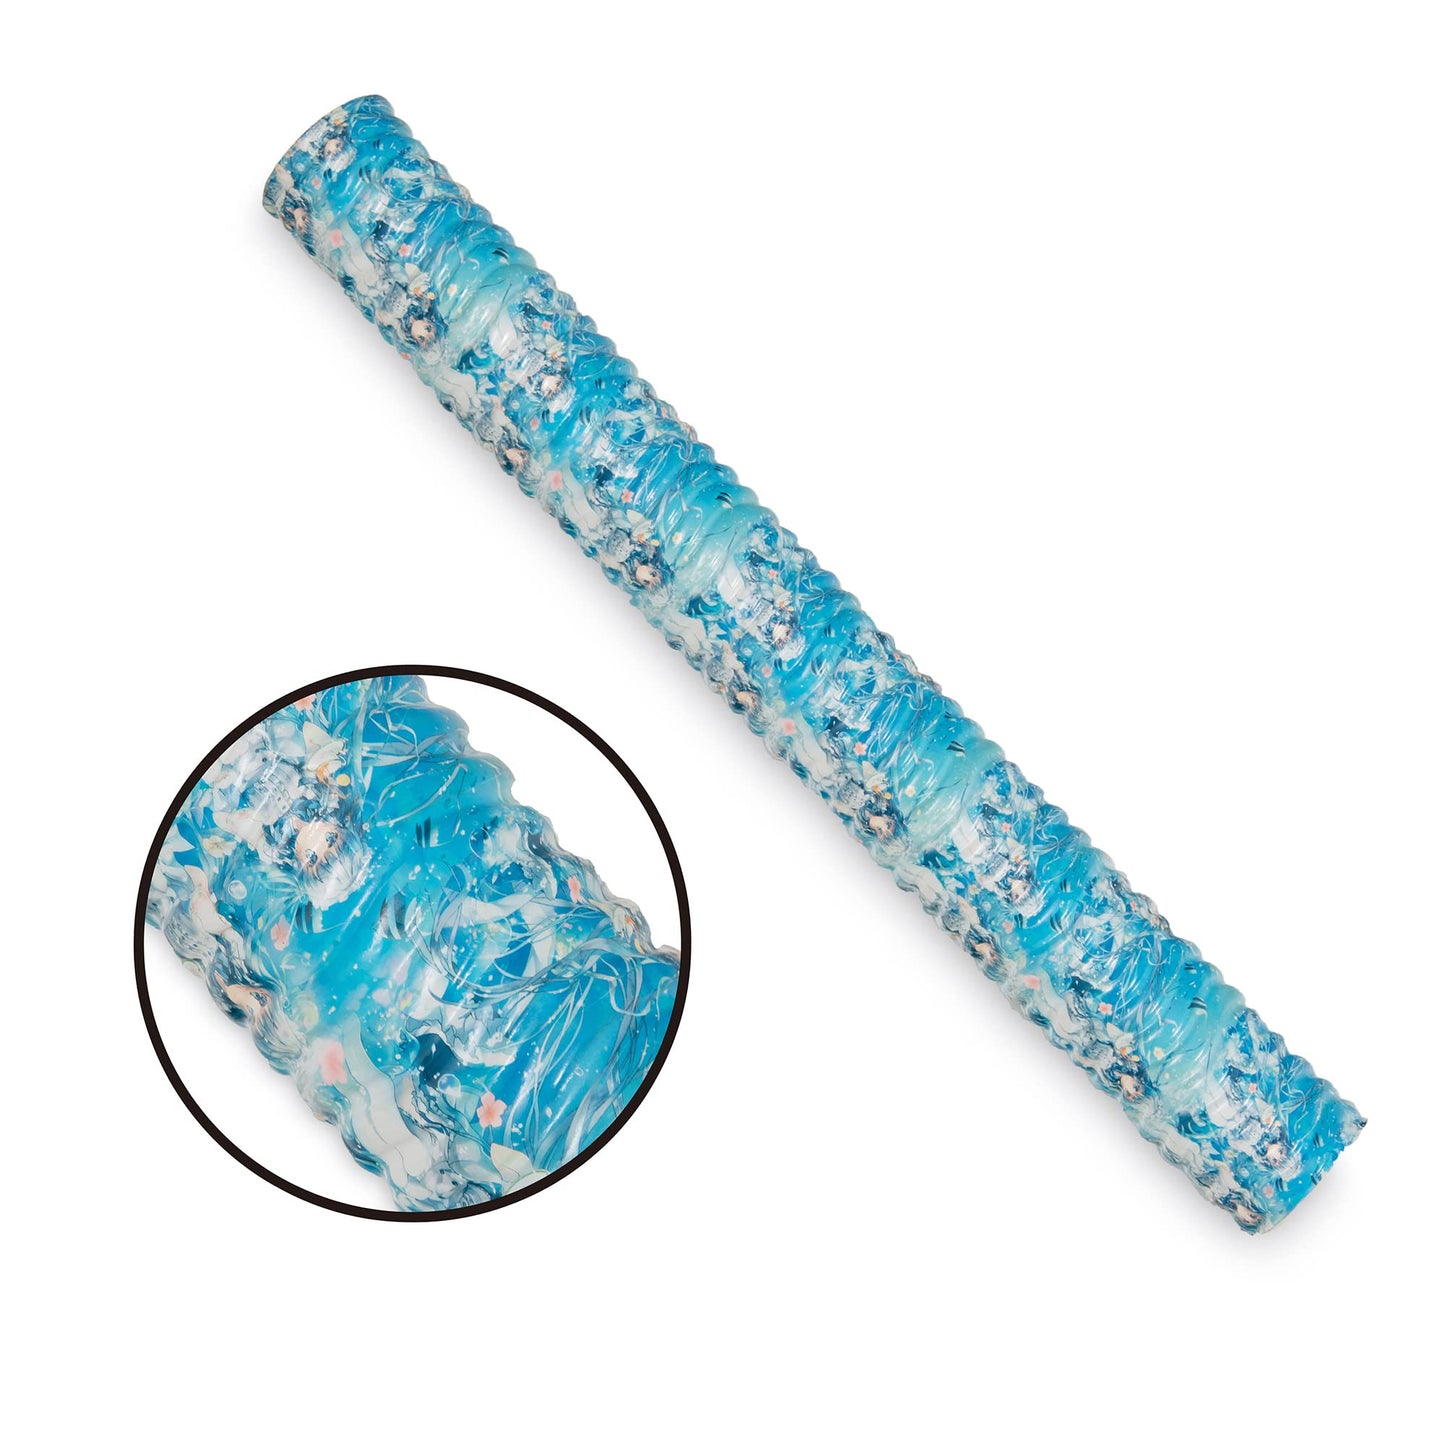 IMMERSA Jumbo Swimming Pool Noodles, Premium Water-Based Vinyl Coating and UV Resistant Soft Foam Noodles for Swimming and Floating, Lake Floats, Pool Floats for Adults and Kids. Ice Princess